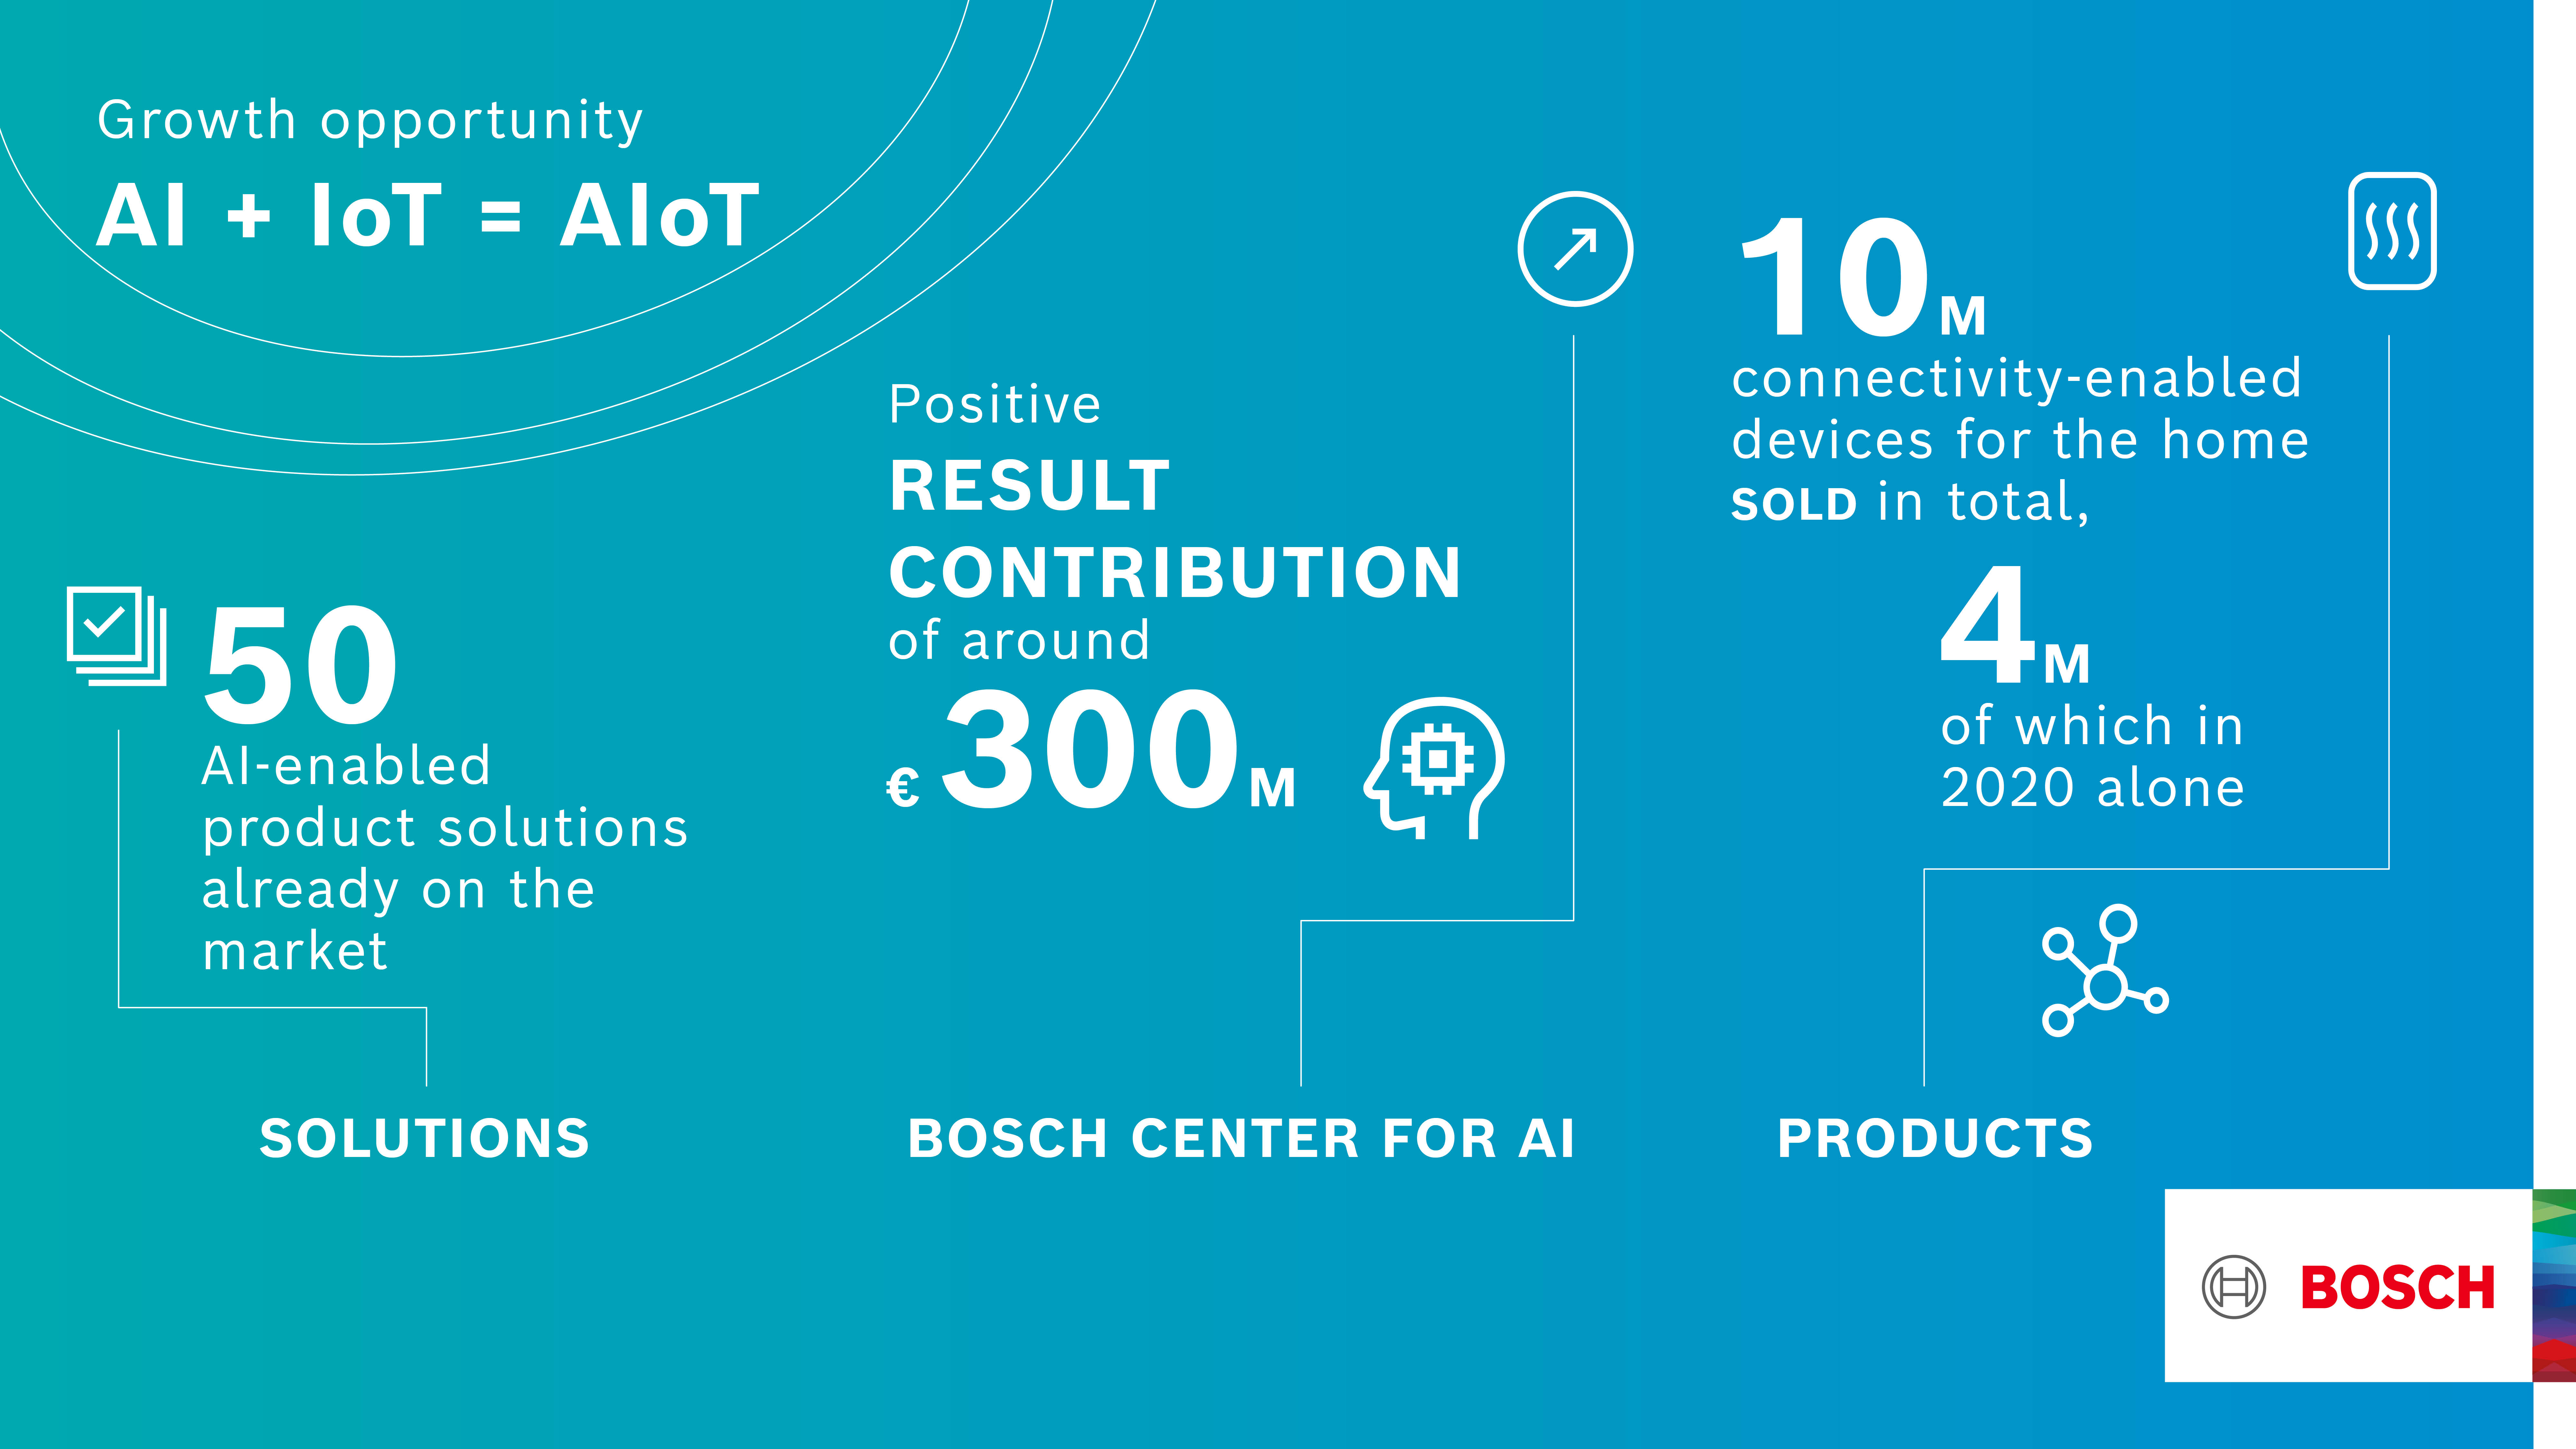 AIoT: Bosch combines connectivity (the internet of things, IoT) and artificial intelligence (AI)